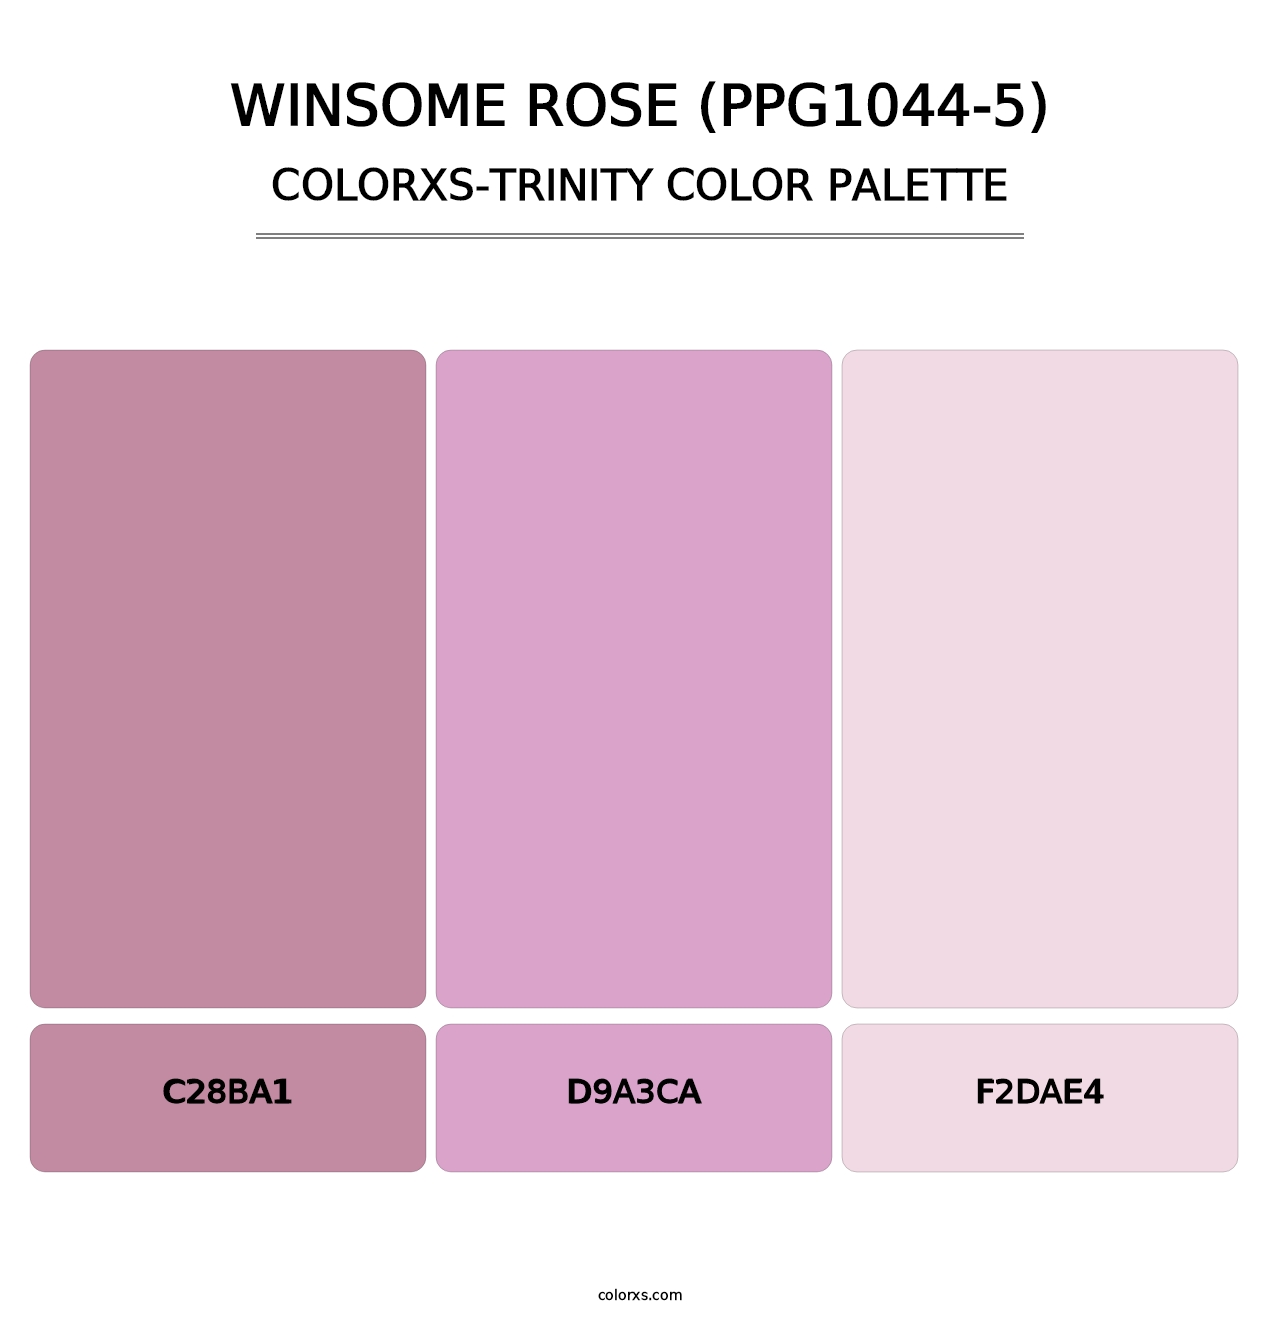 Winsome Rose (PPG1044-5) - Colorxs Trinity Palette